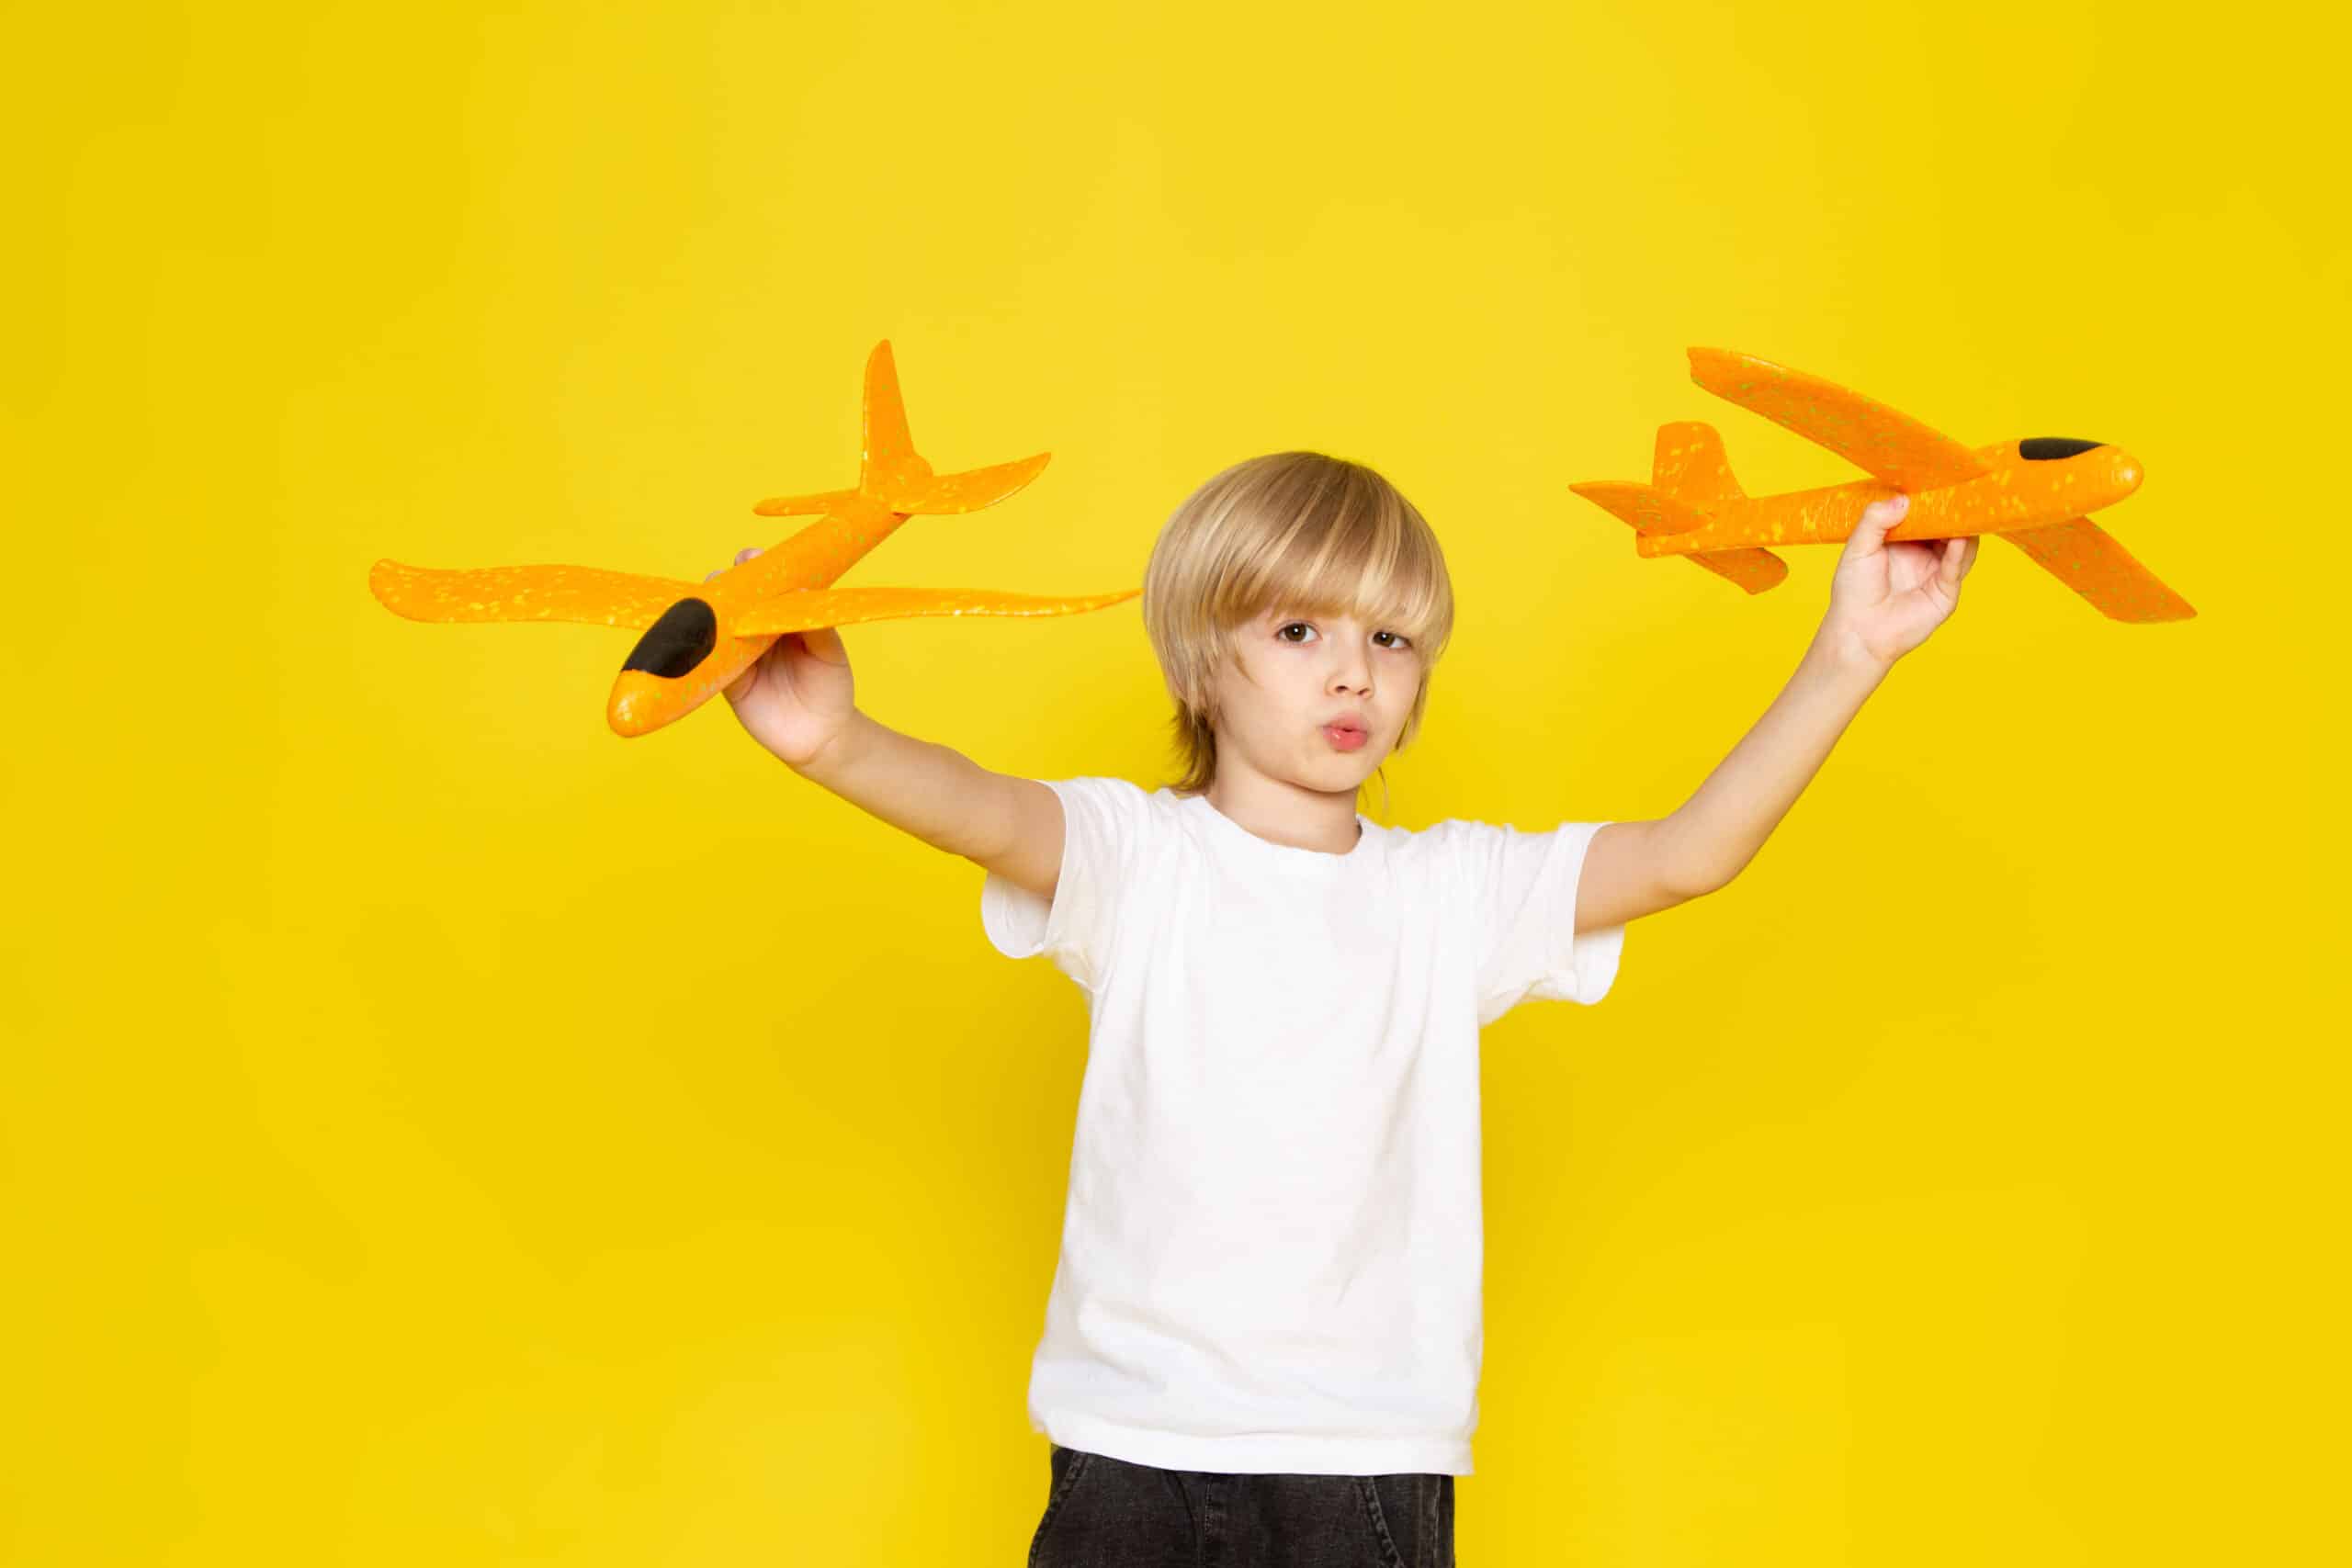 Child holding toy airplanes against a yellow background